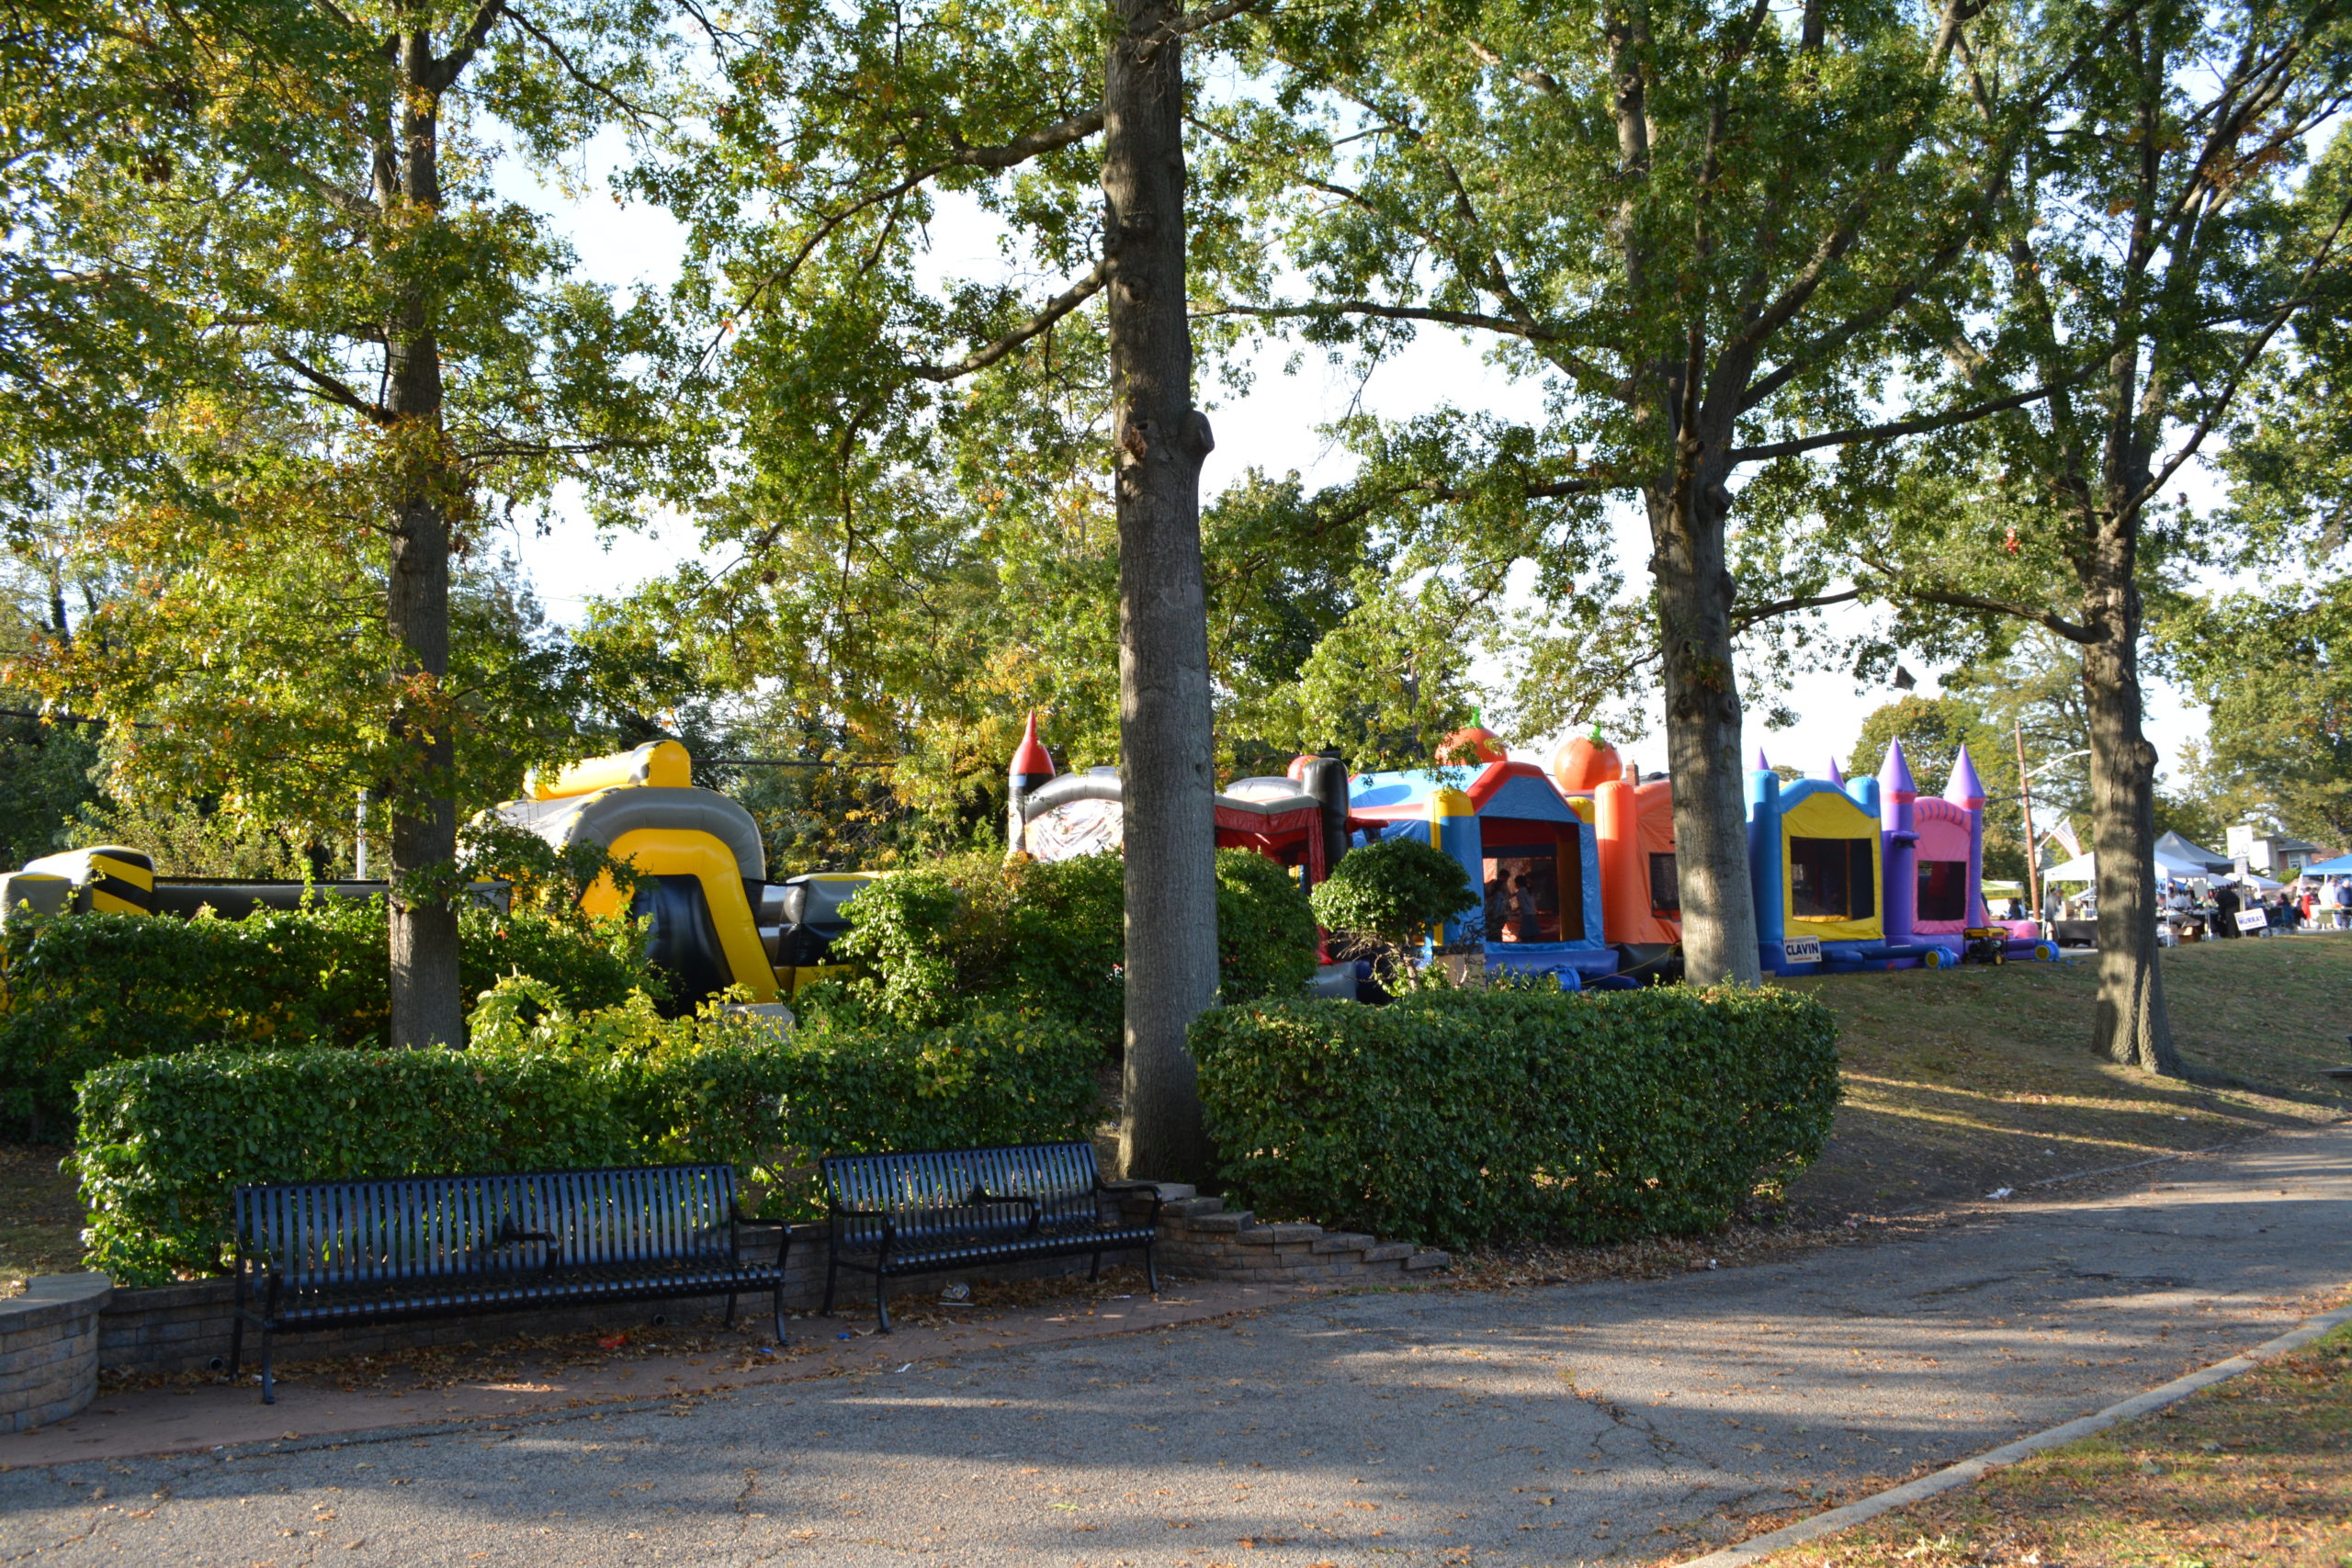 West Hempstead Fall Street Fair brings a funfilled day to the